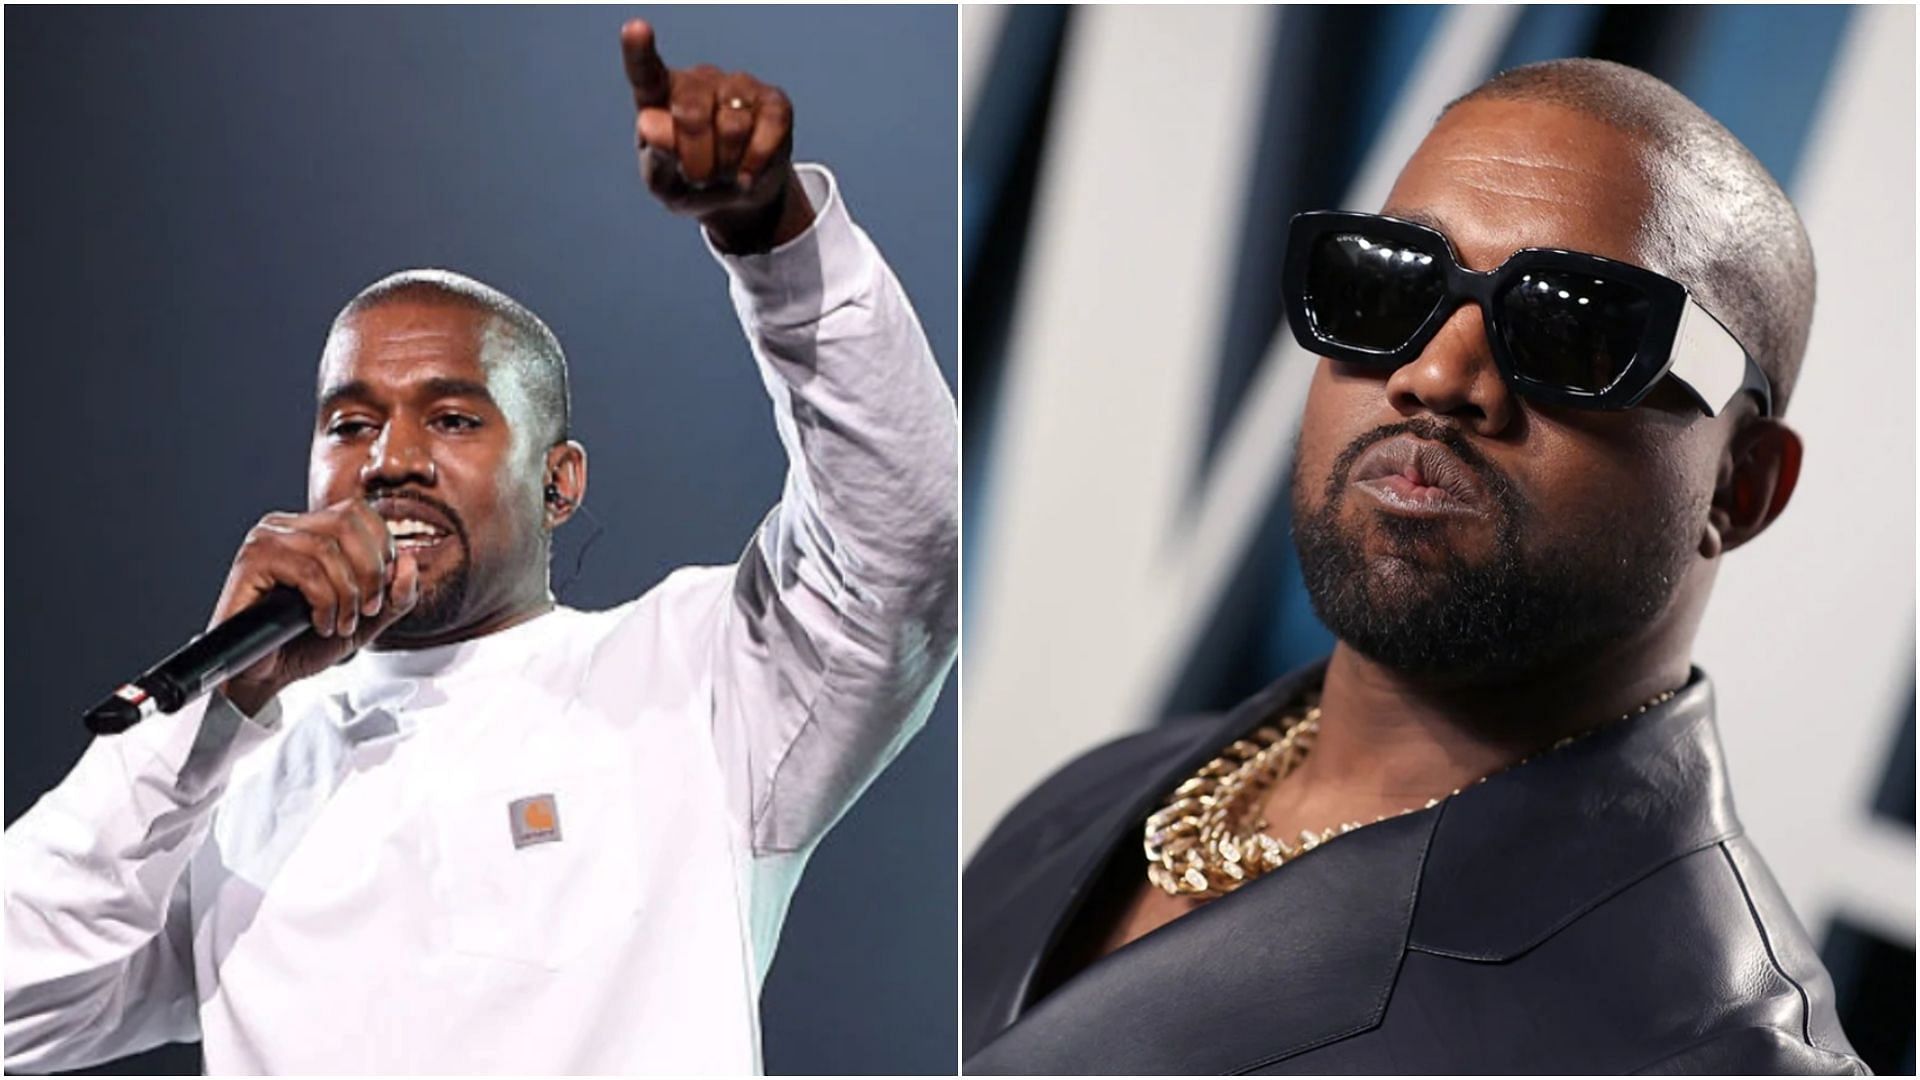 A production company has now sued Kanye for over $7 million. (Images via Getty)